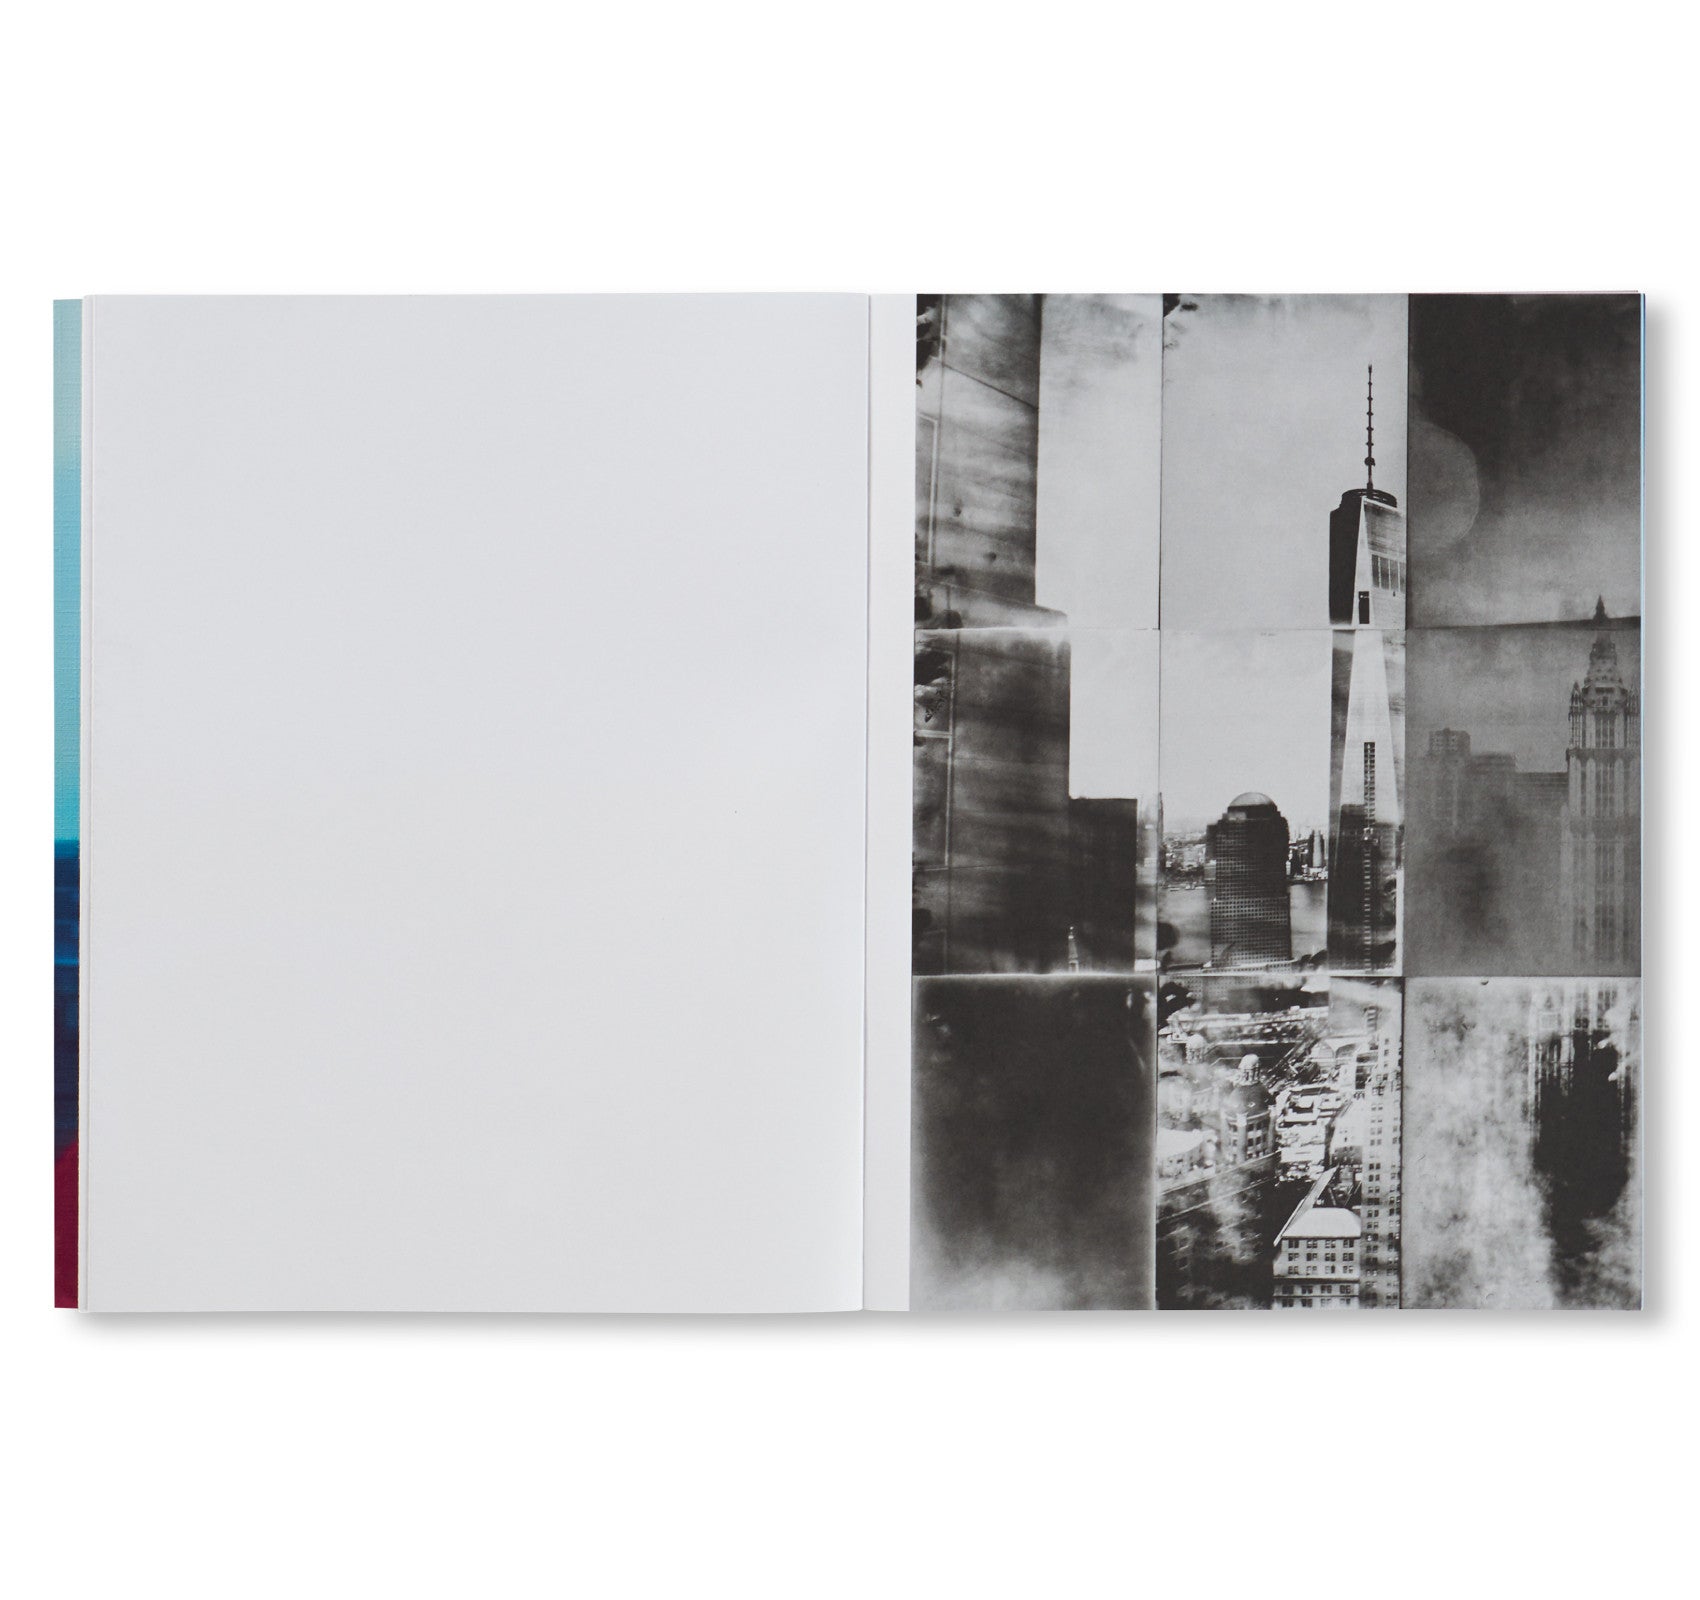 THE NARCISSISTIC CITY by Takashi Homma [SIGNED]